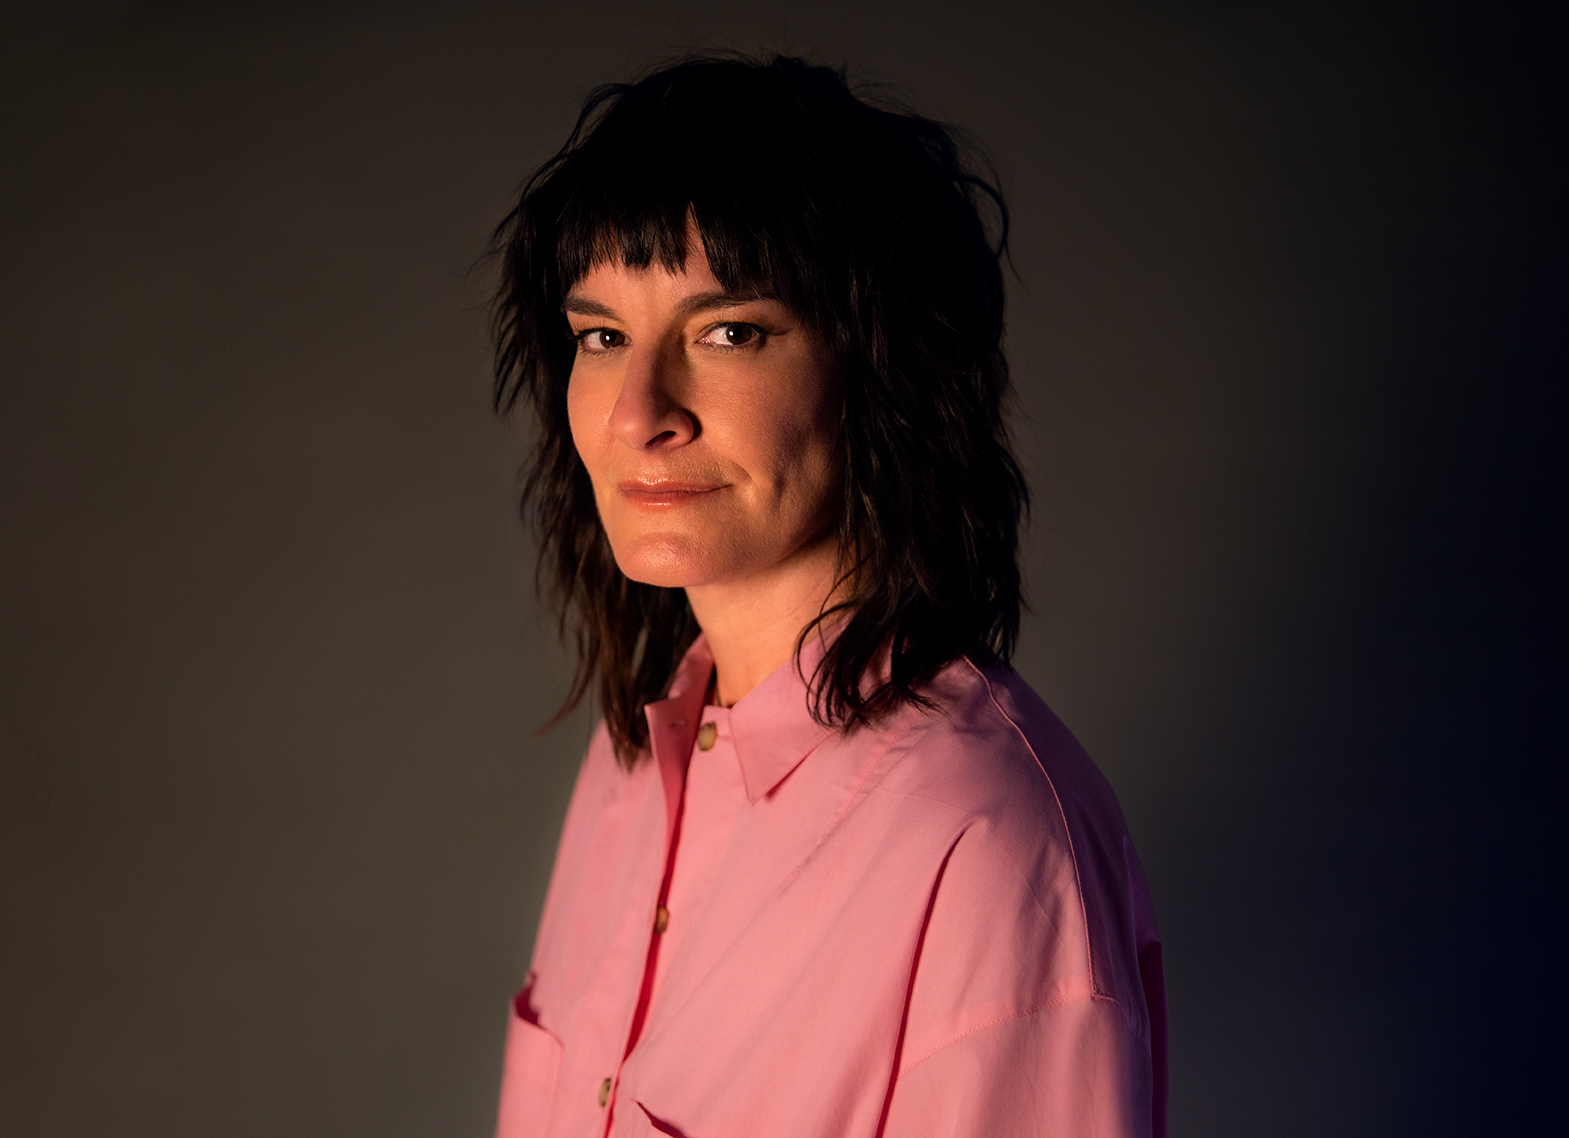 JEN CLOHER – We have to talk about the real stuff